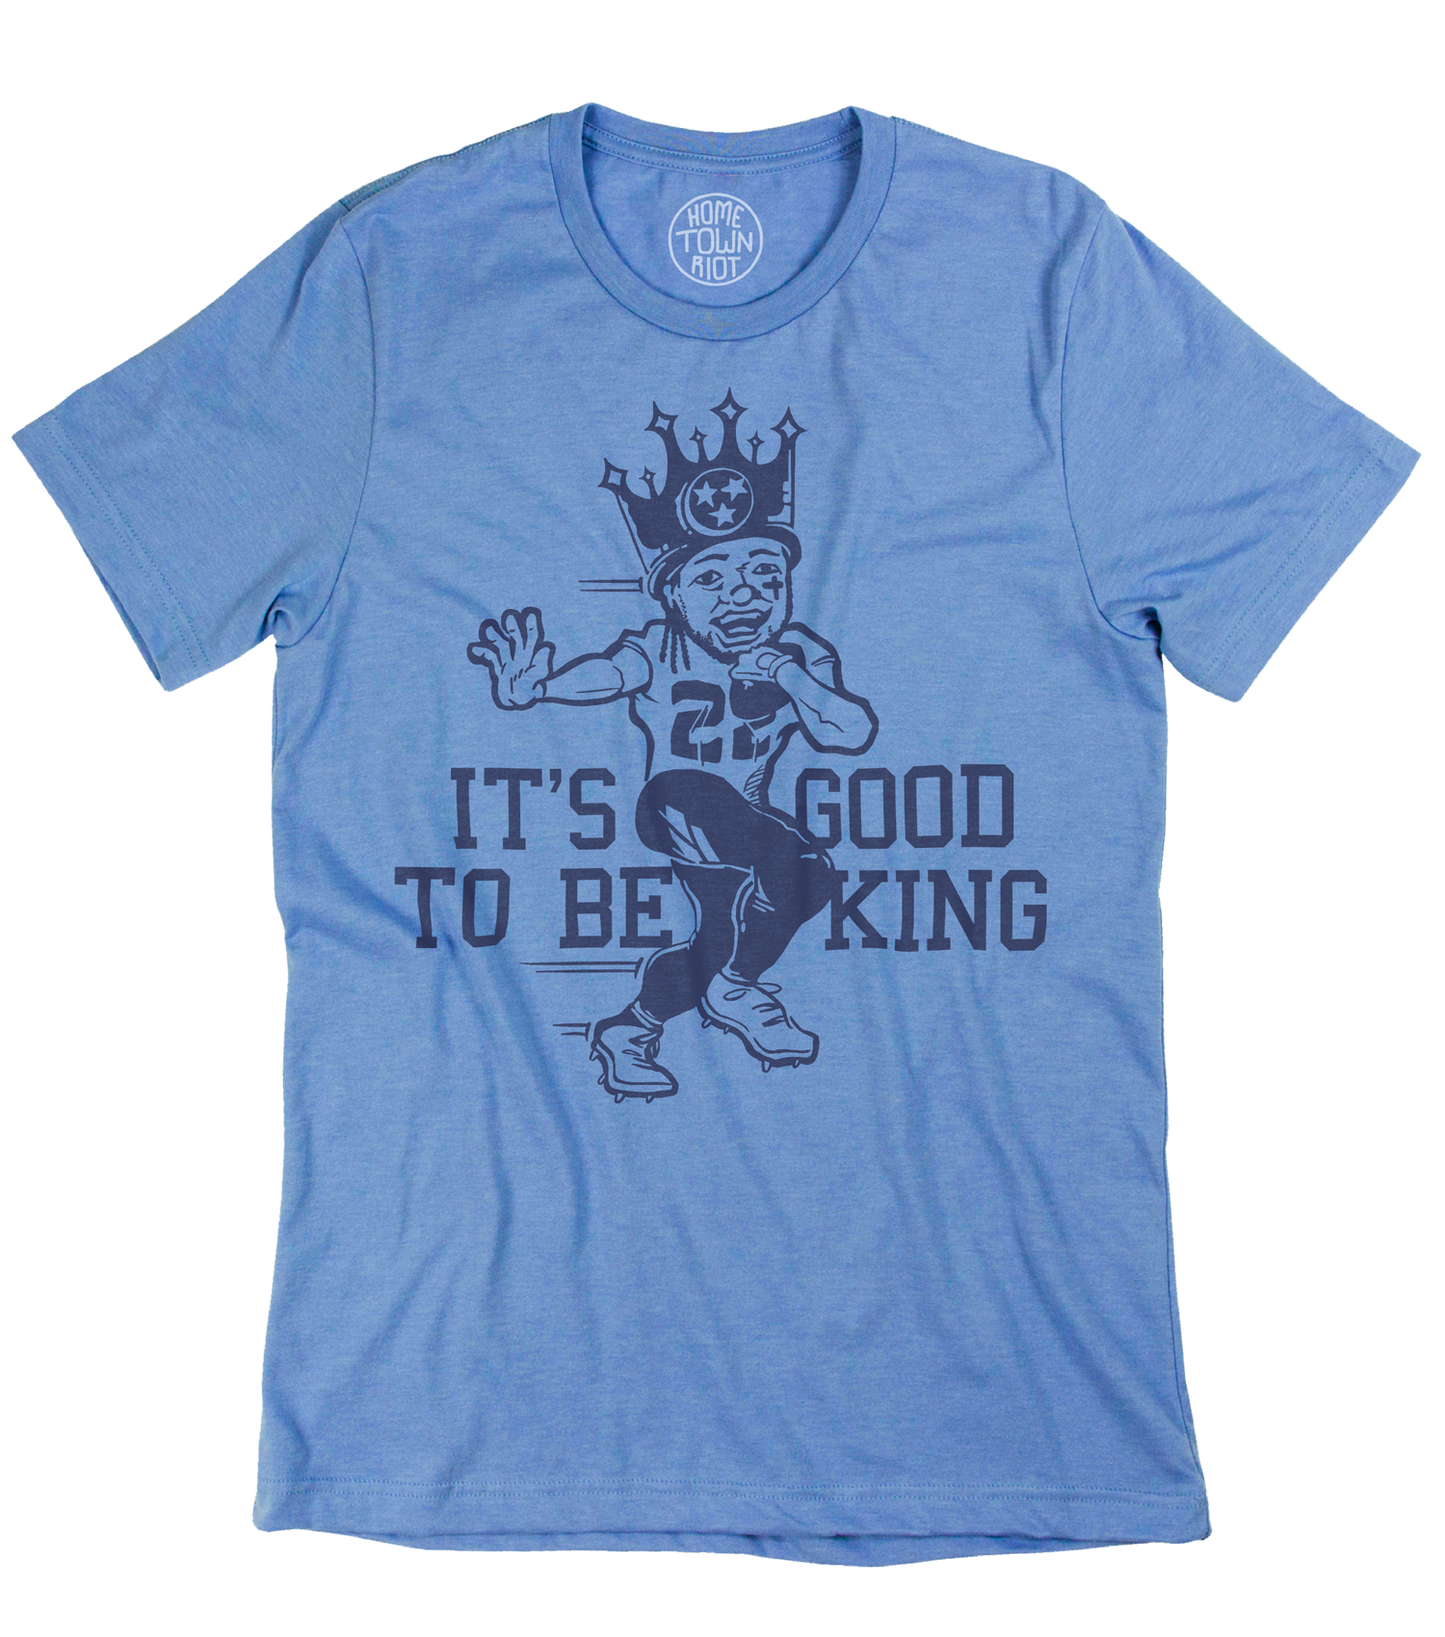 It's Good To Be King Tennessee Football Shirt